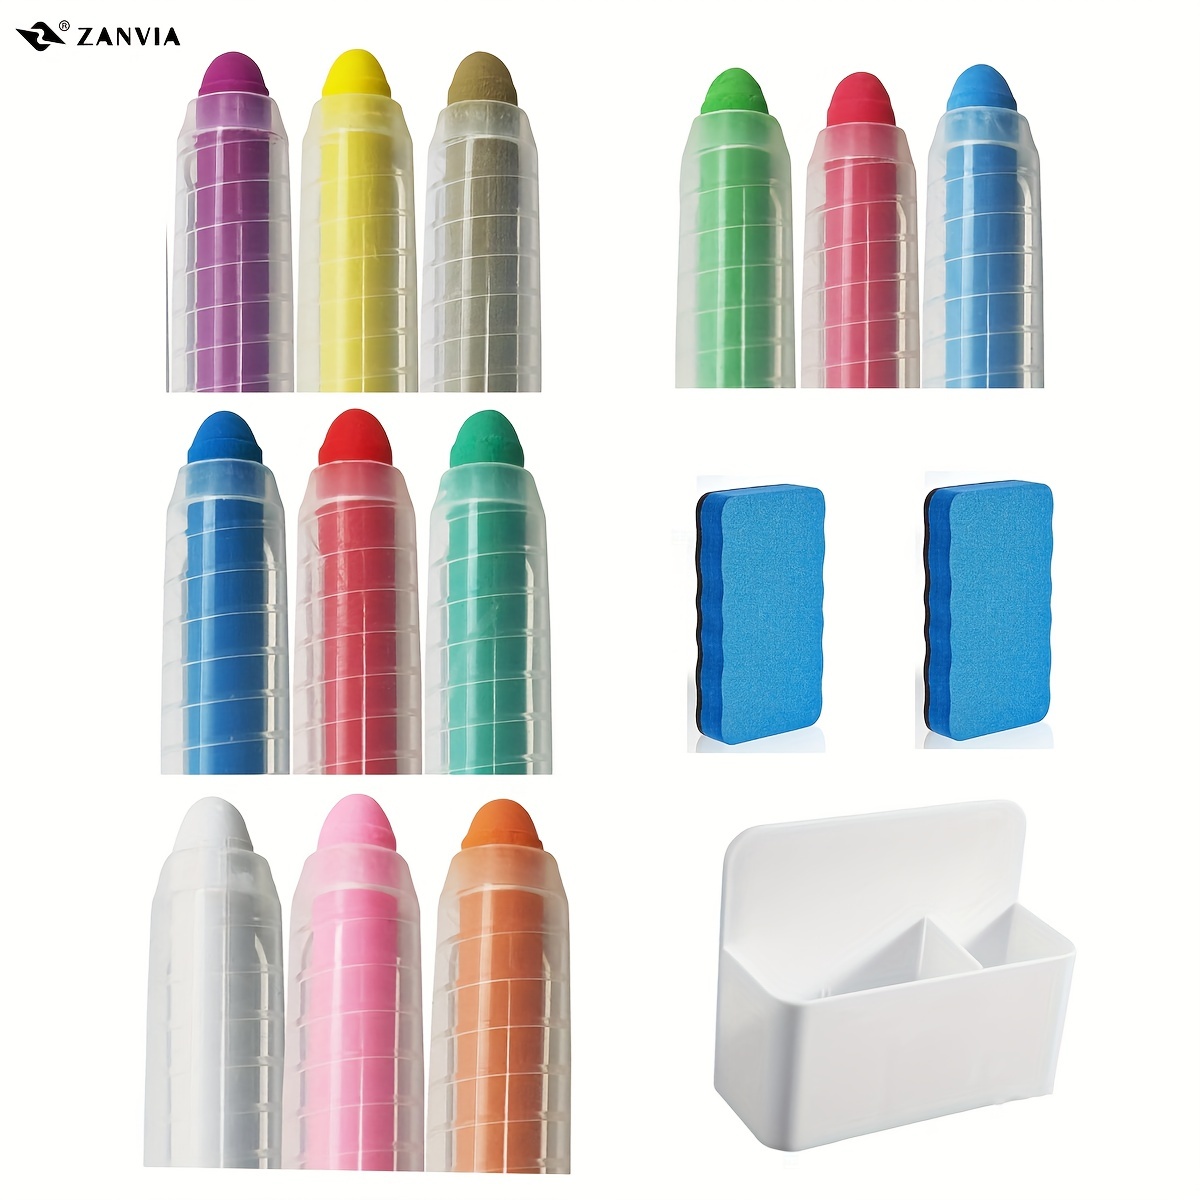 Dustless Chalk Non-toxic Colored Chalk 1.0mm Tip Art Tool，12PCS Colored  Chalk With Holder for Whiteboard Blackboard Kids Children Drawing Writing 